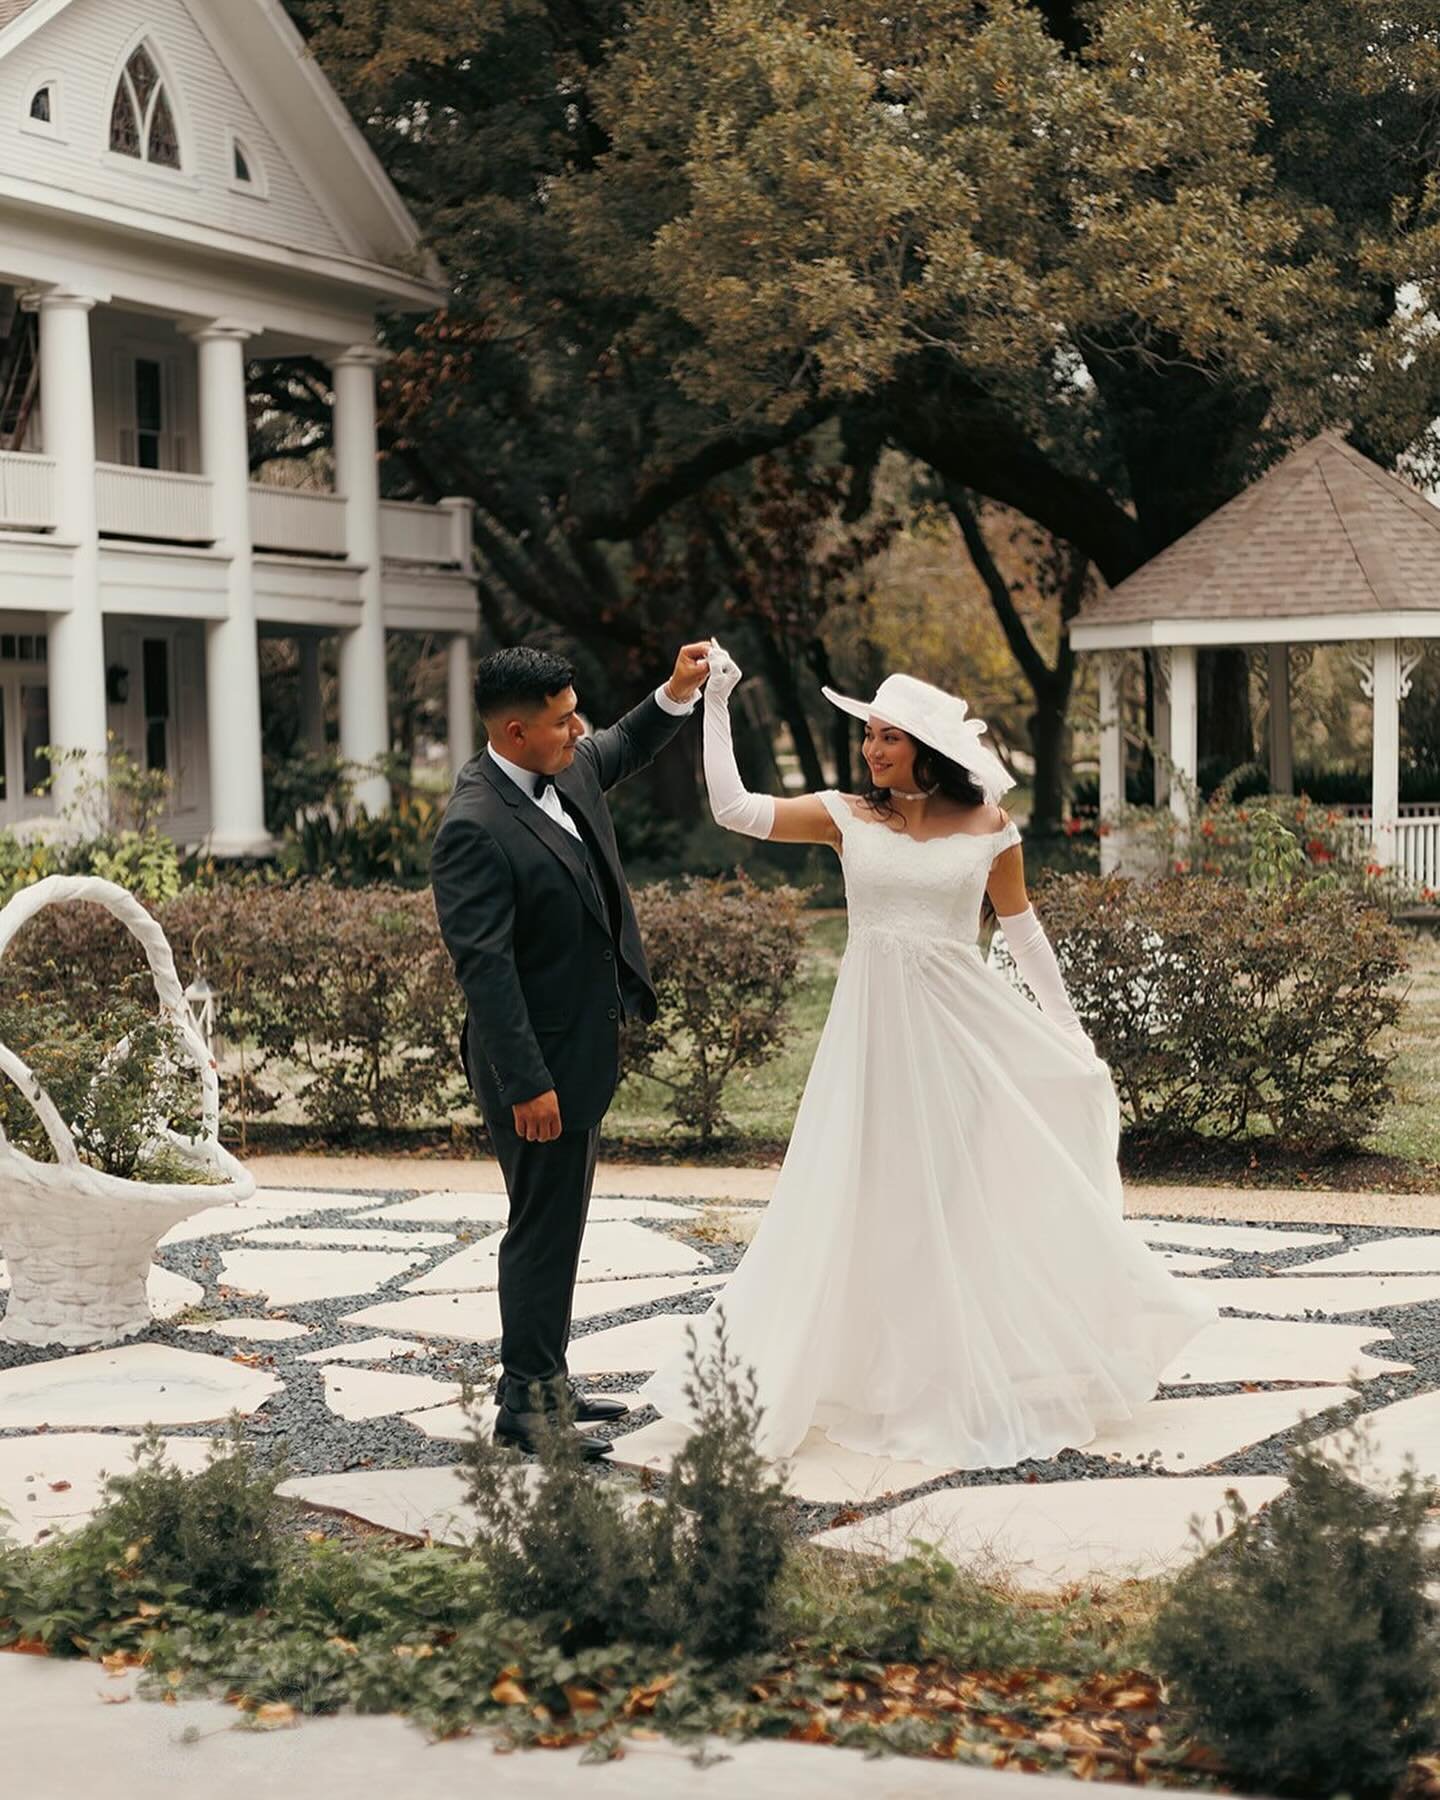 Step back in time to celebrate your love in the timeless elegance of our Victorian wedding venue. Create memories as enchanting as the era itself. 

Venue: @heavenonearthoaks 
Photographer: @jgroverphotoco 
Bride: @sam_bamm7 

NOW BOOKING 2024 &amp;2